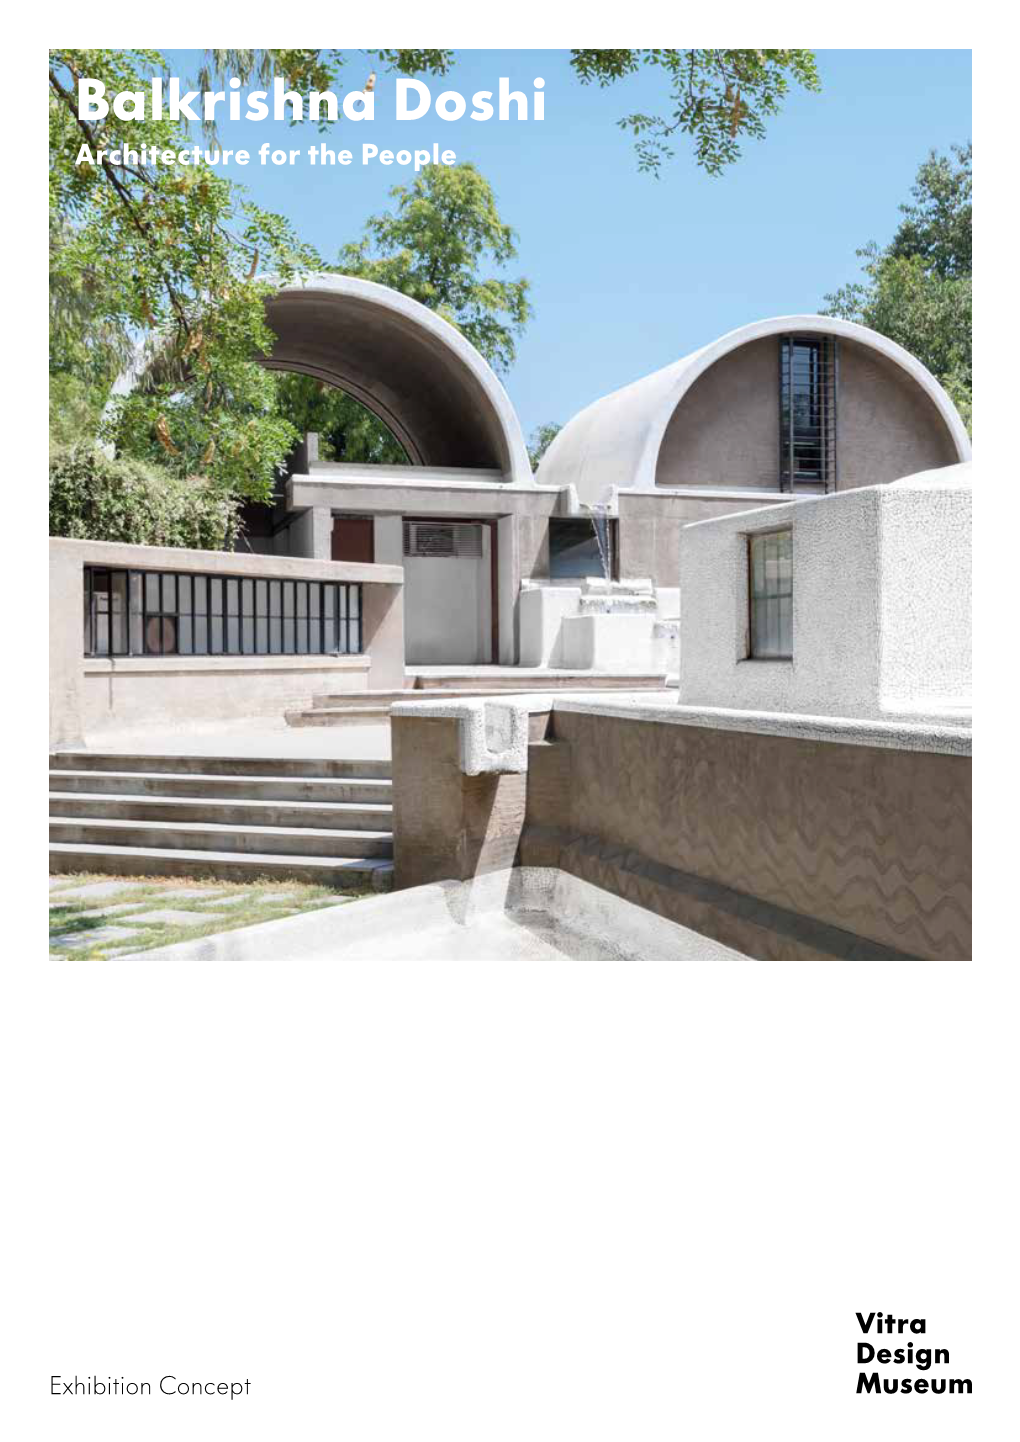 Balkrishna Doshi Architecture for the People